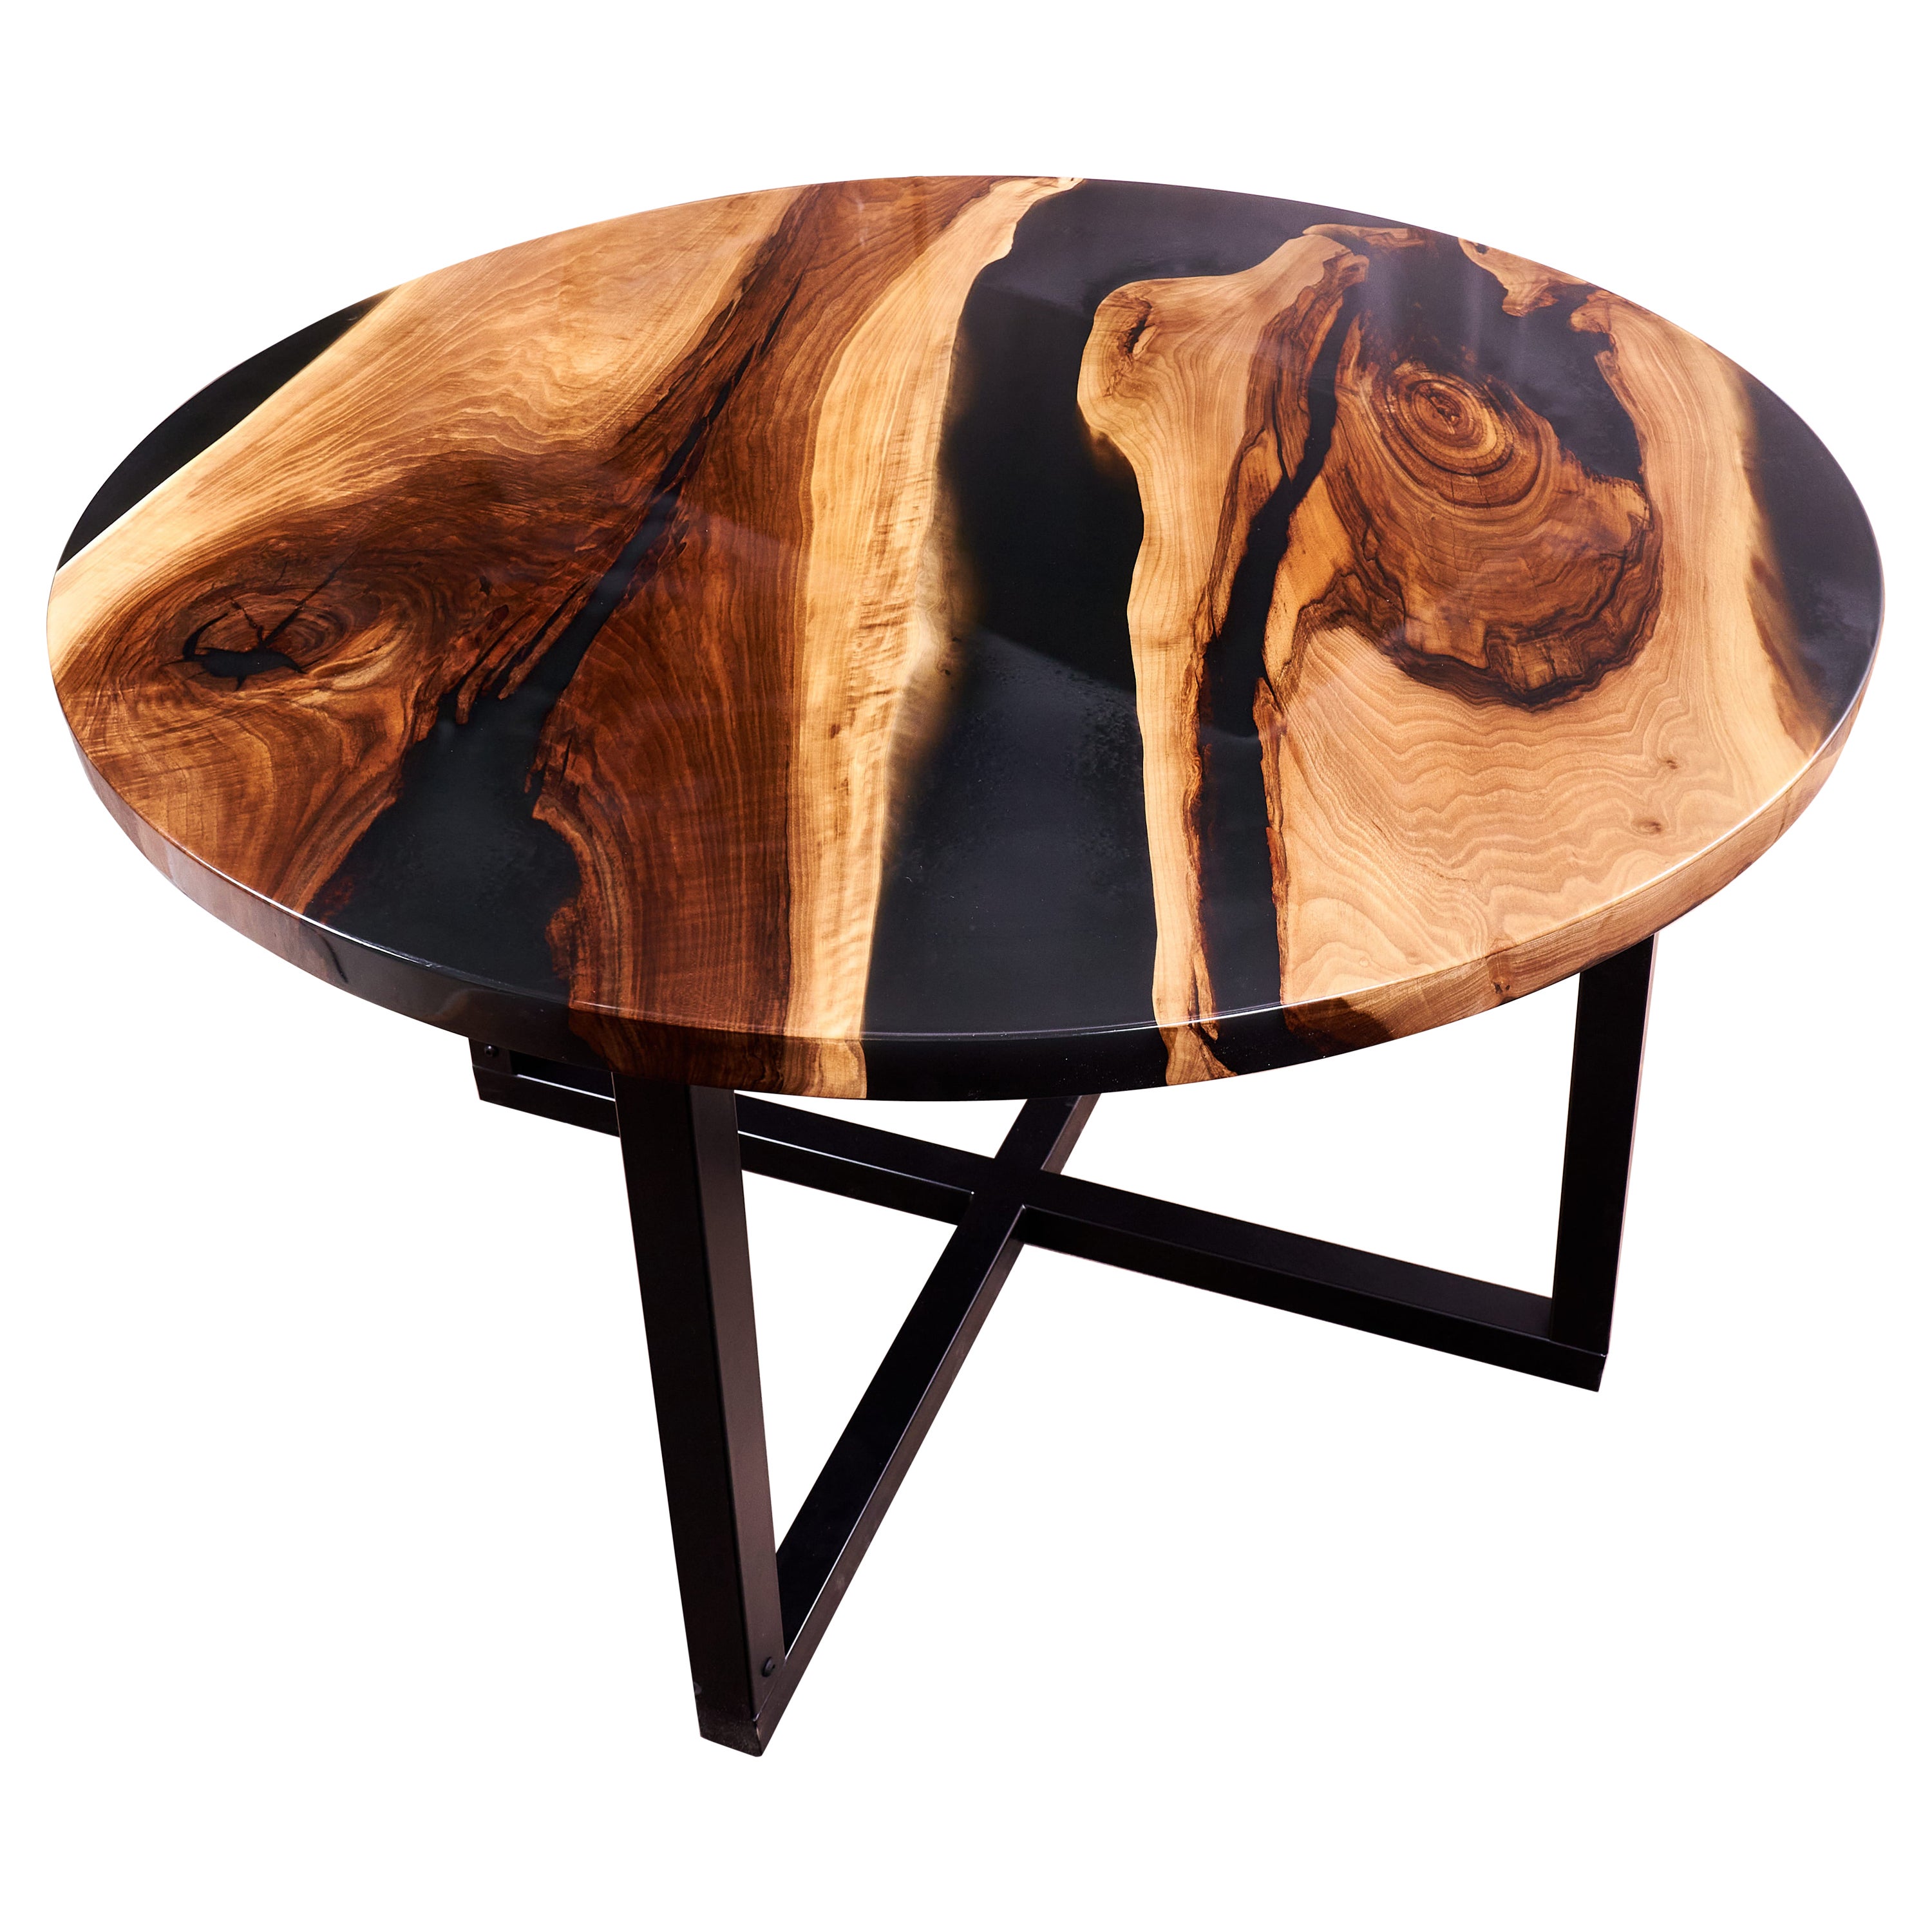 Contemporary Round Dining Table Walnut Mid Century Modern Style Table